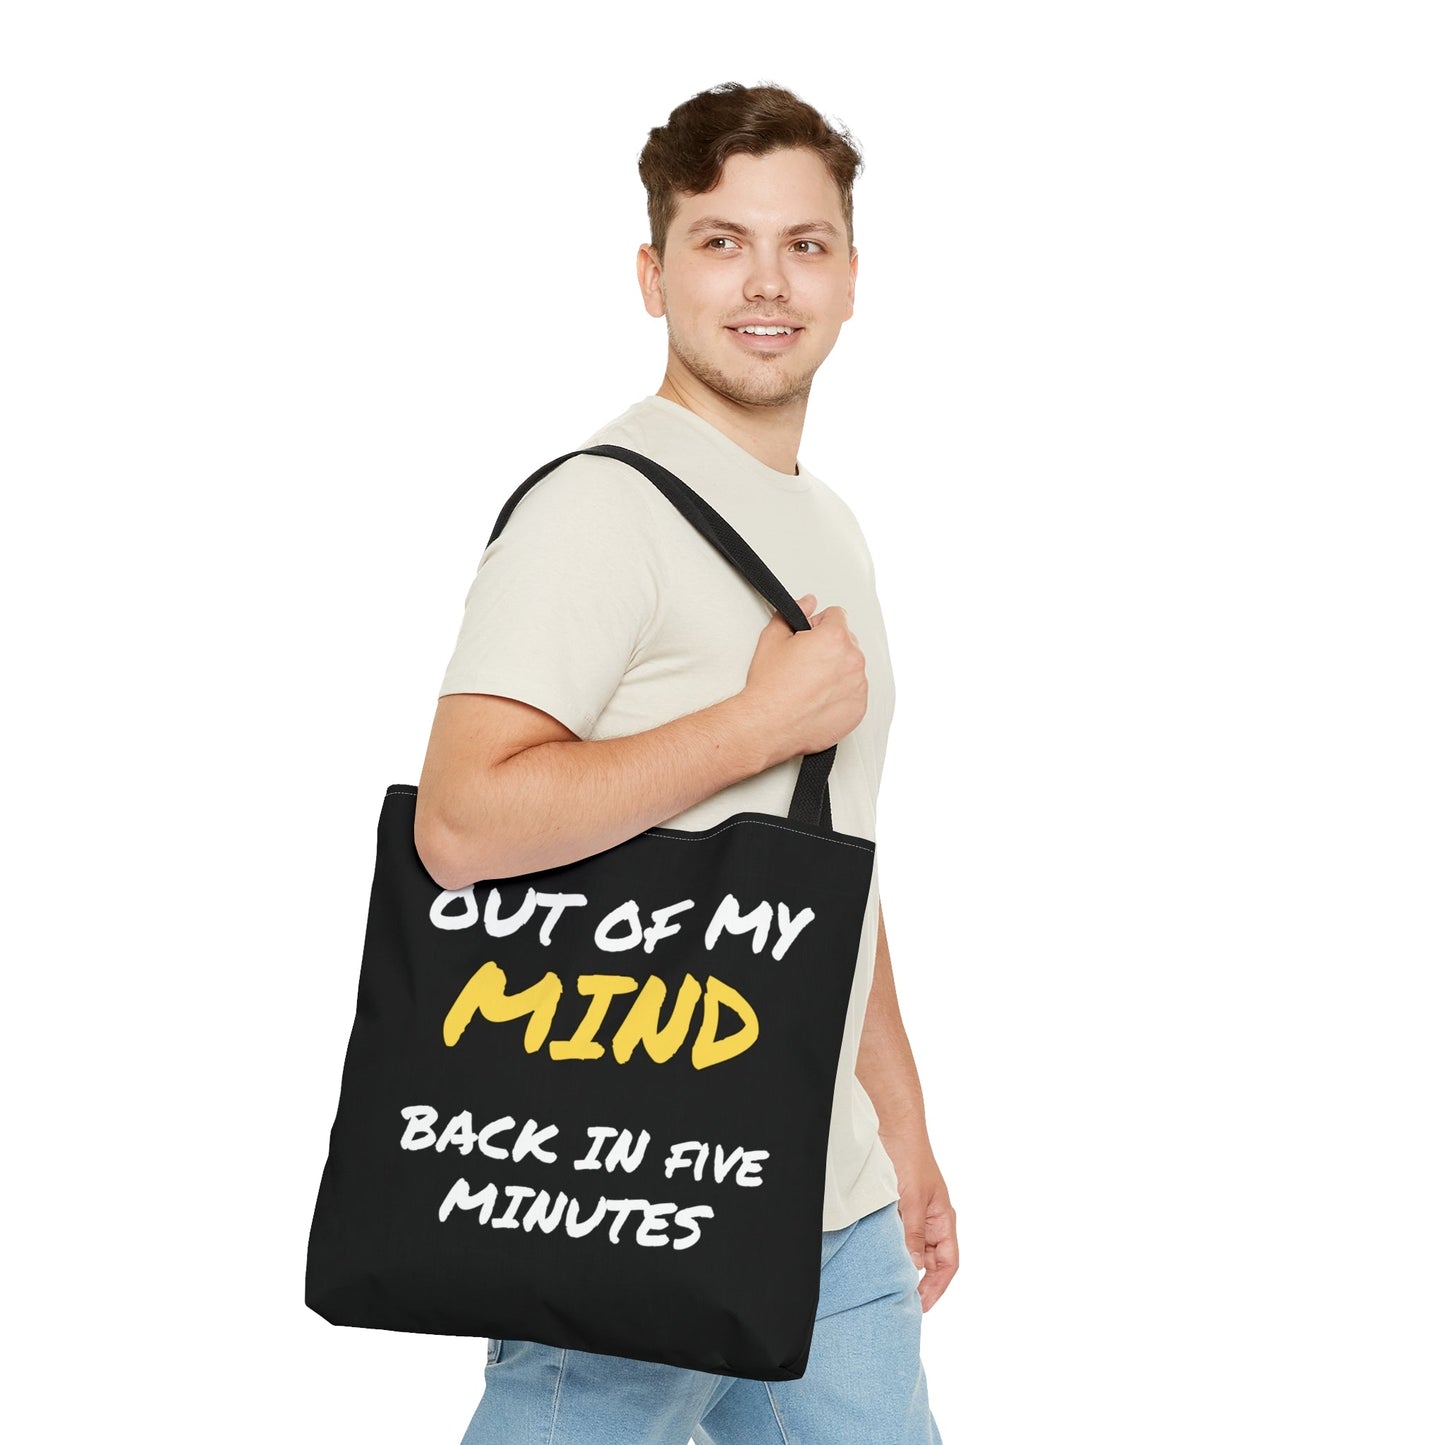 Out of My Mind | Tote Bag